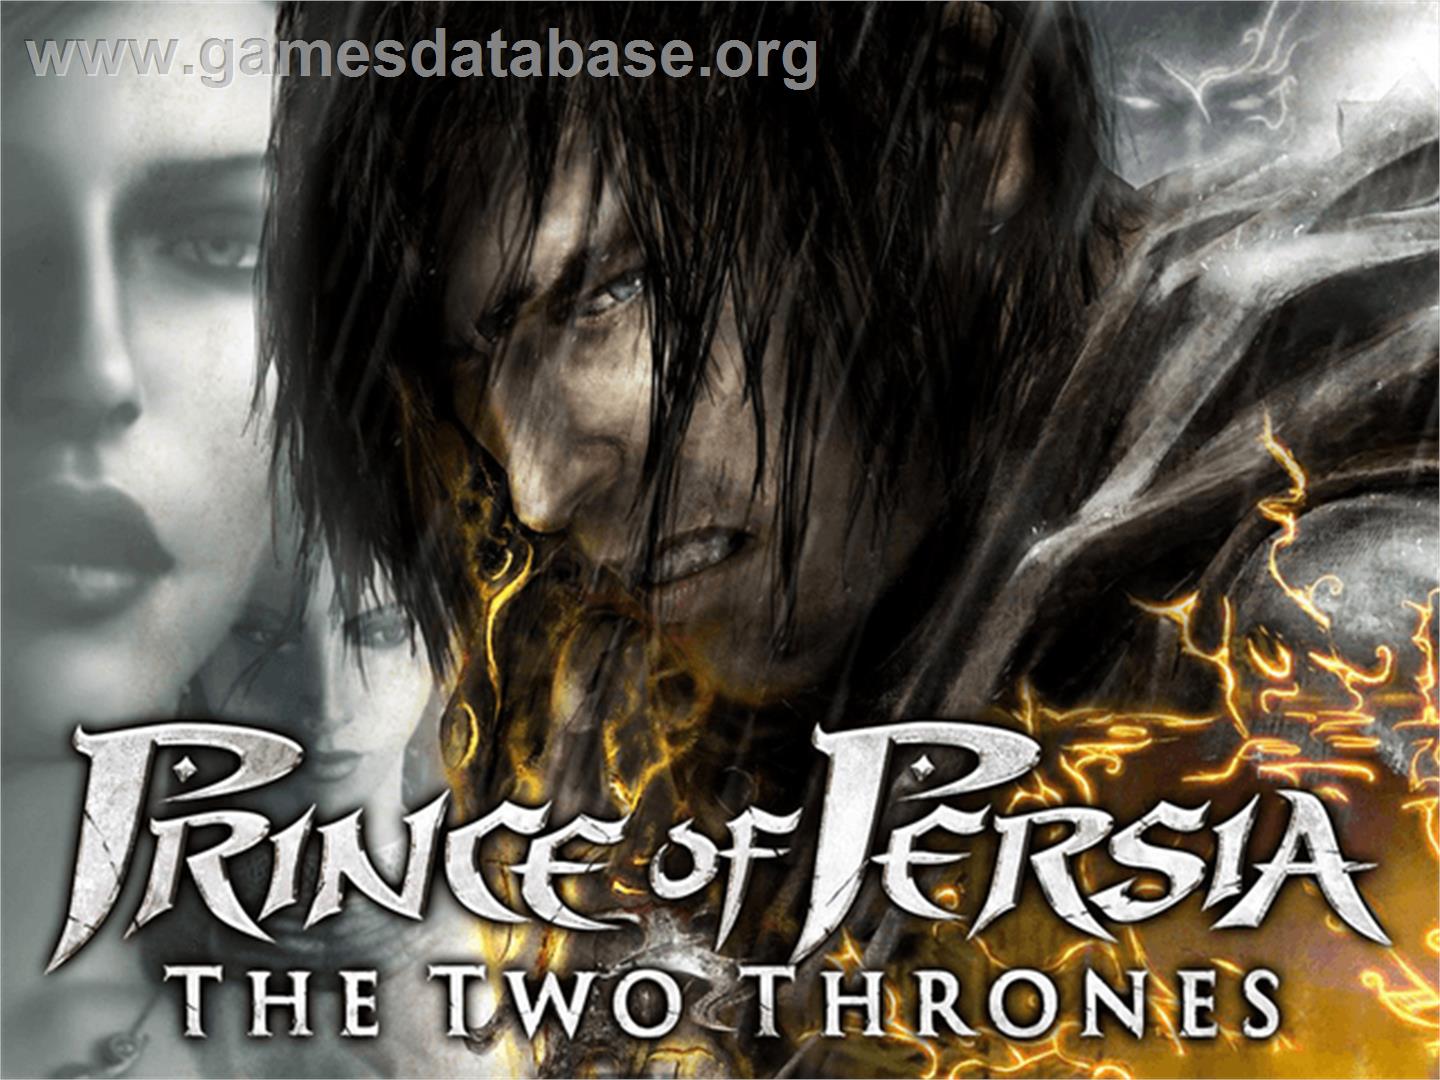 Prince of Persia: The Two Thrones - Microsoft Xbox - Artwork - Title Screen